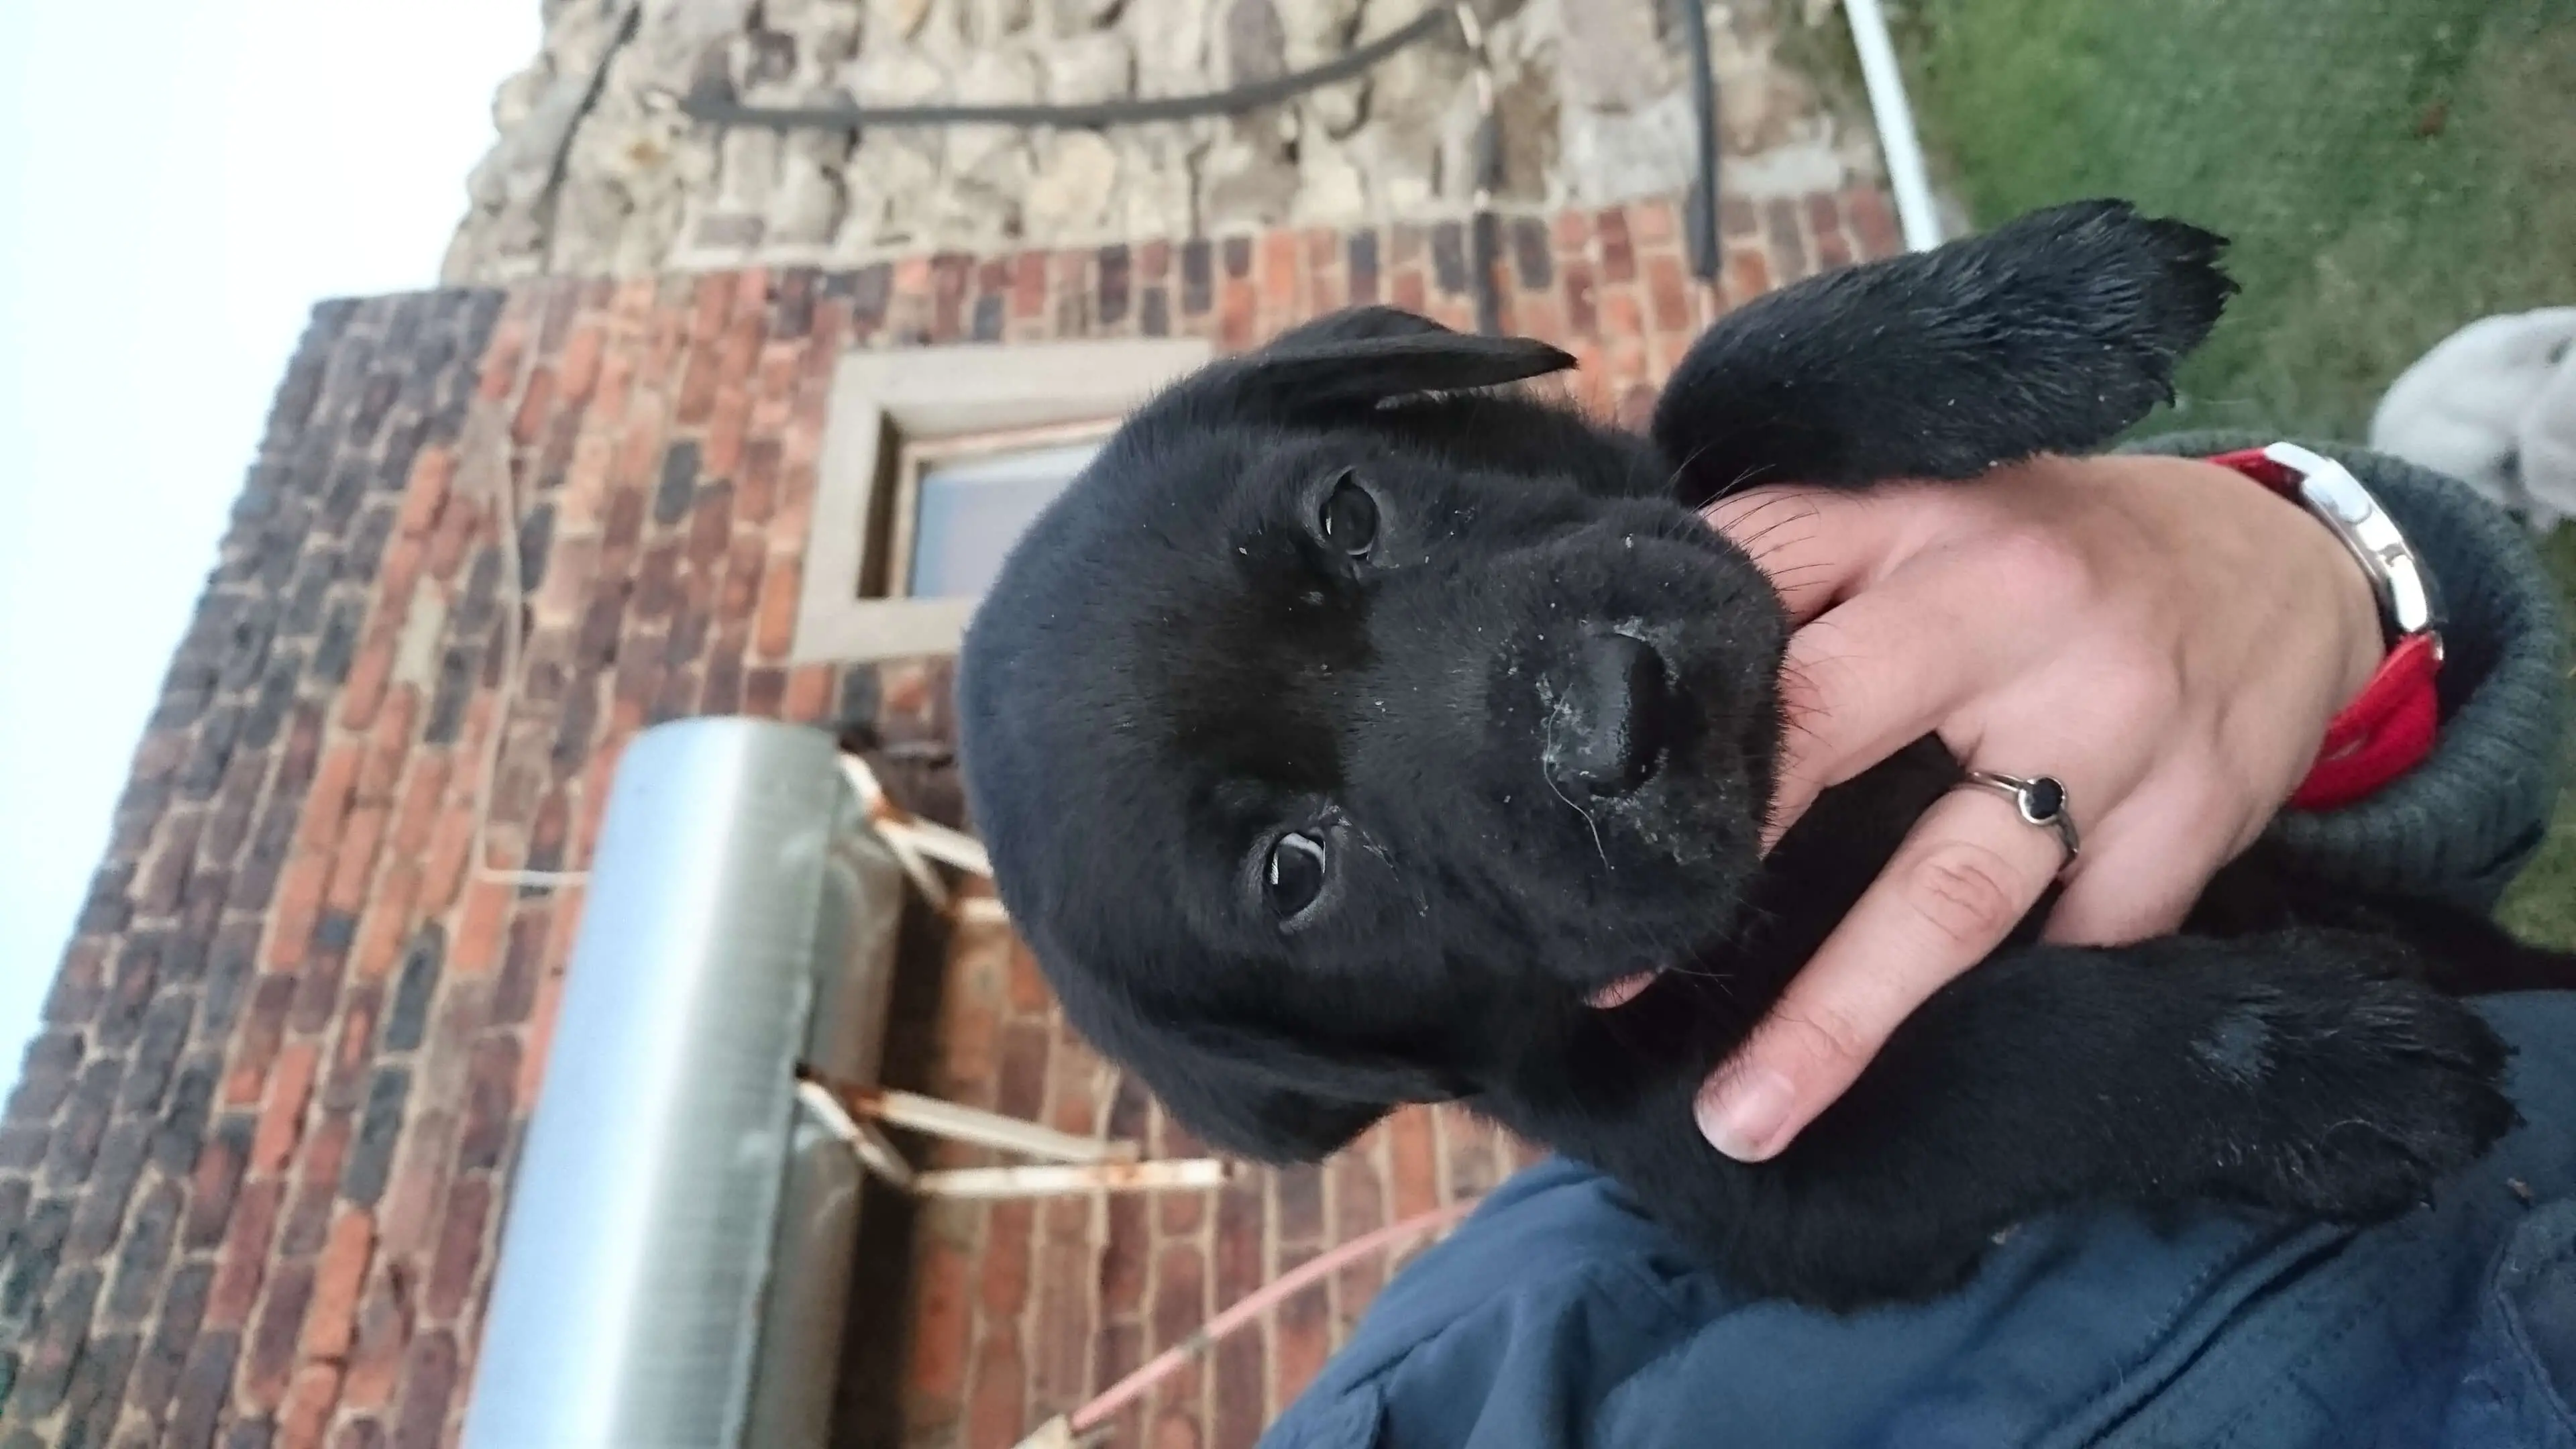 Labrador Puppies for Sale in Johannesburg by Norma1303